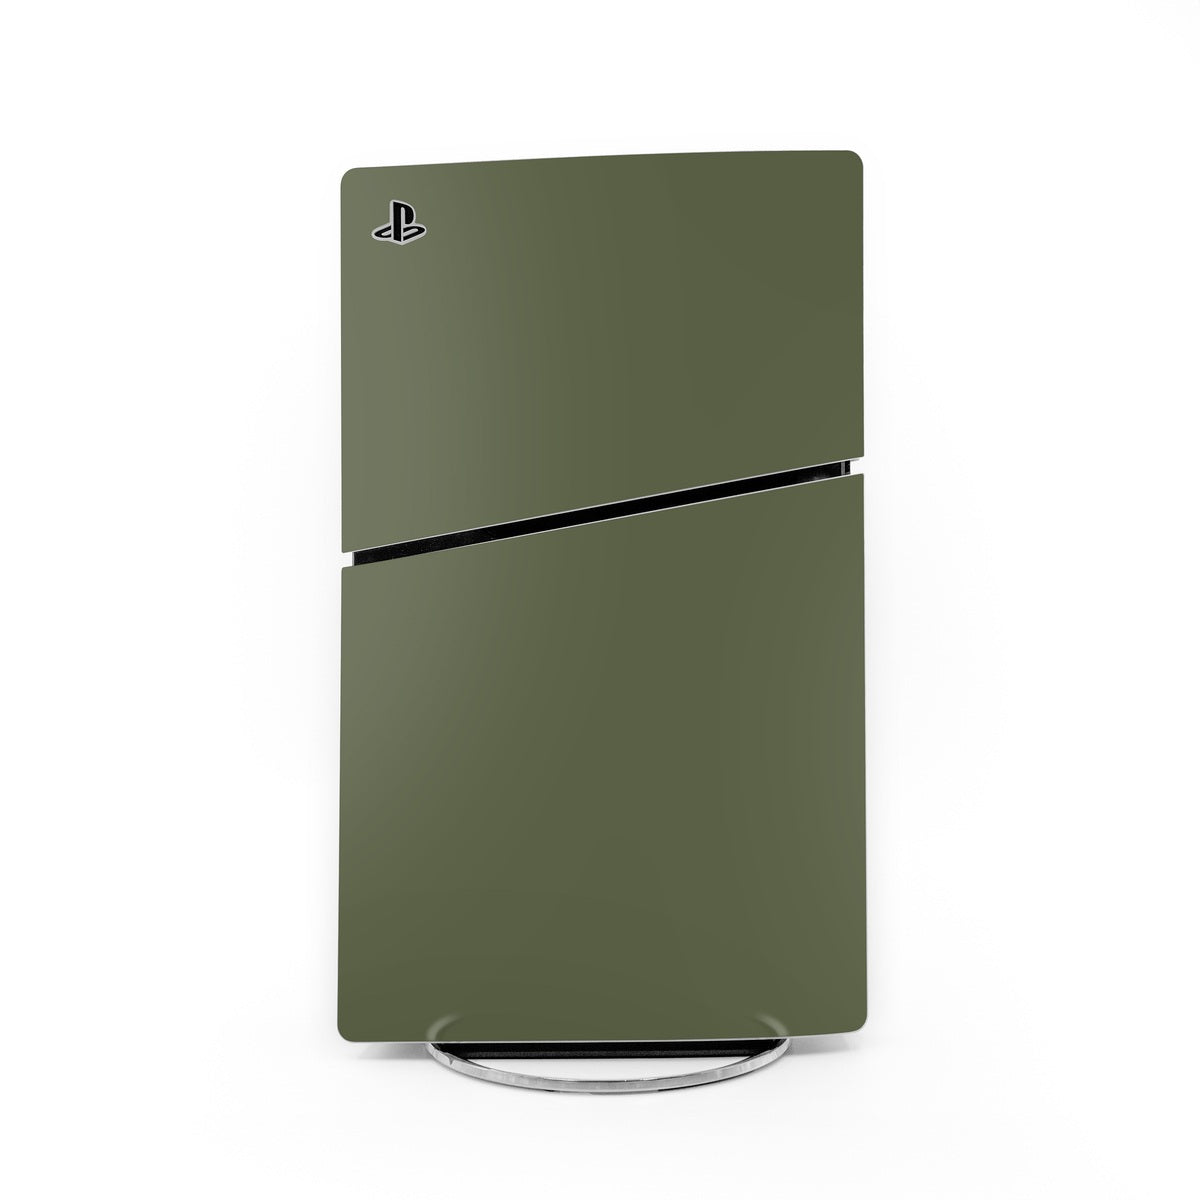 Solid State Olive Drab - Sony PS5 Slim Skin